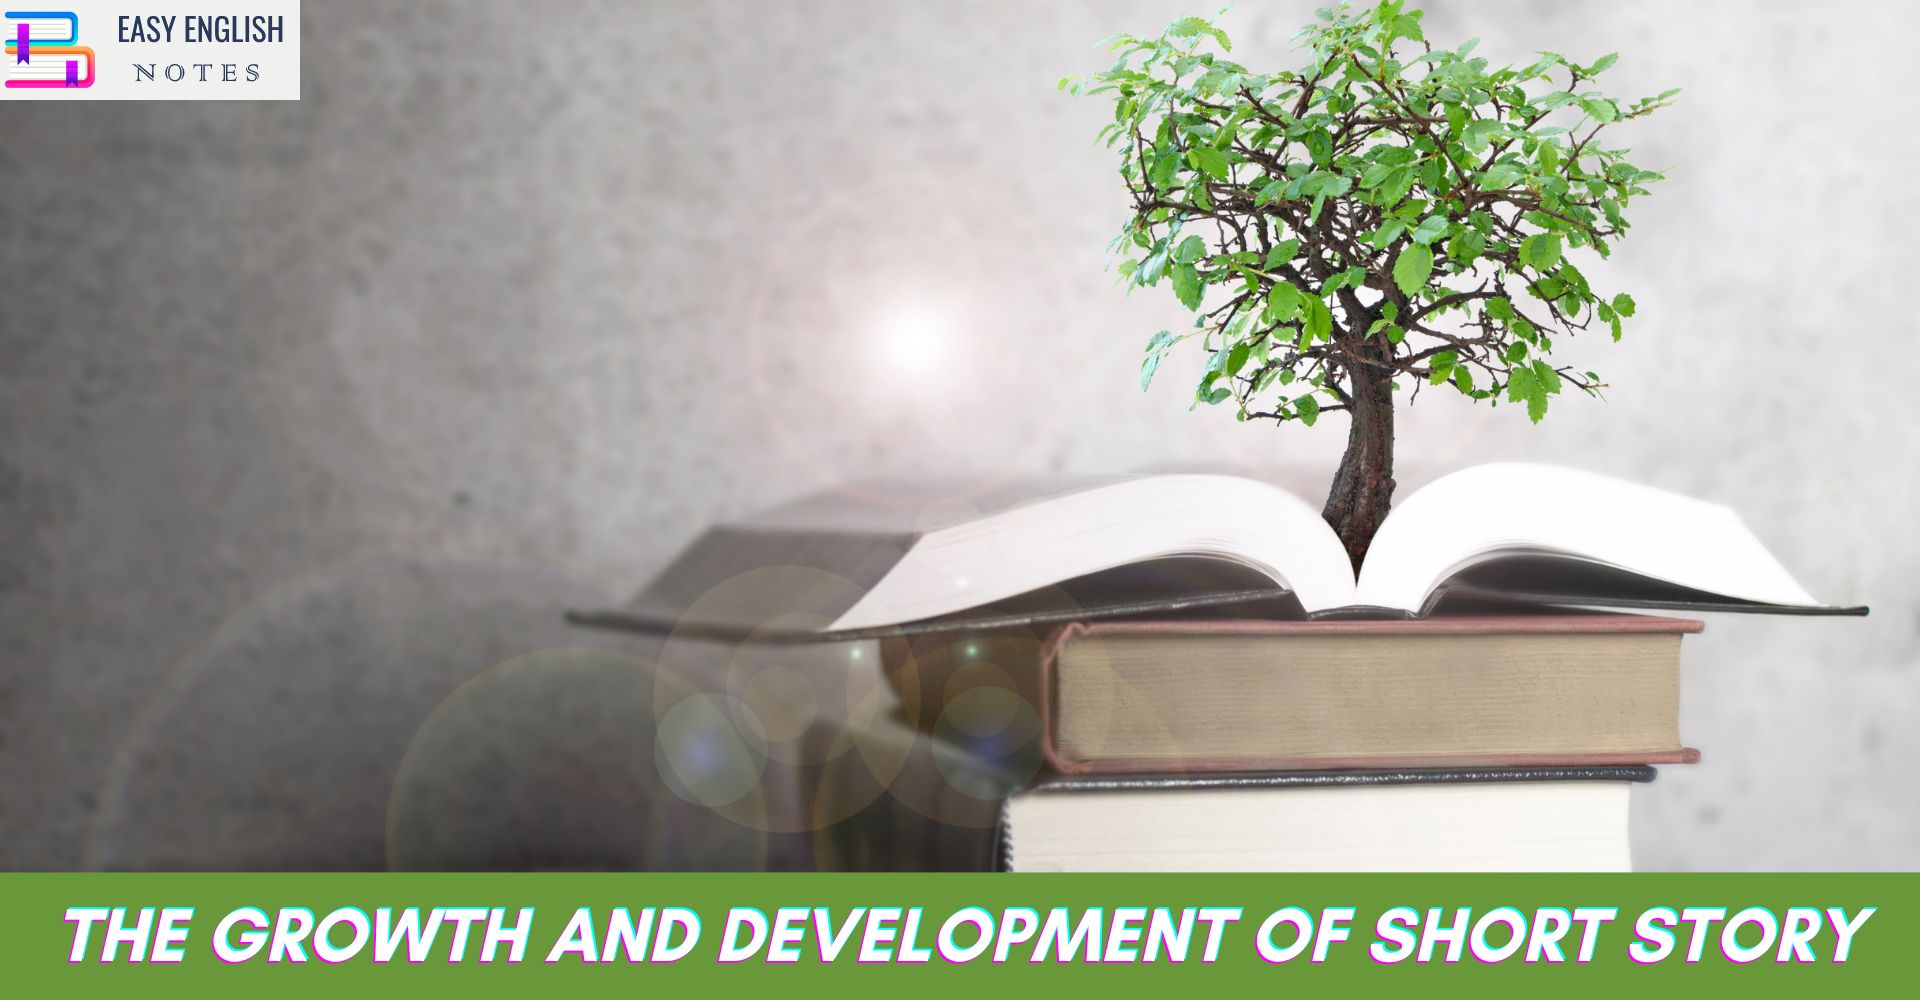 The Growth and Development of Short Story